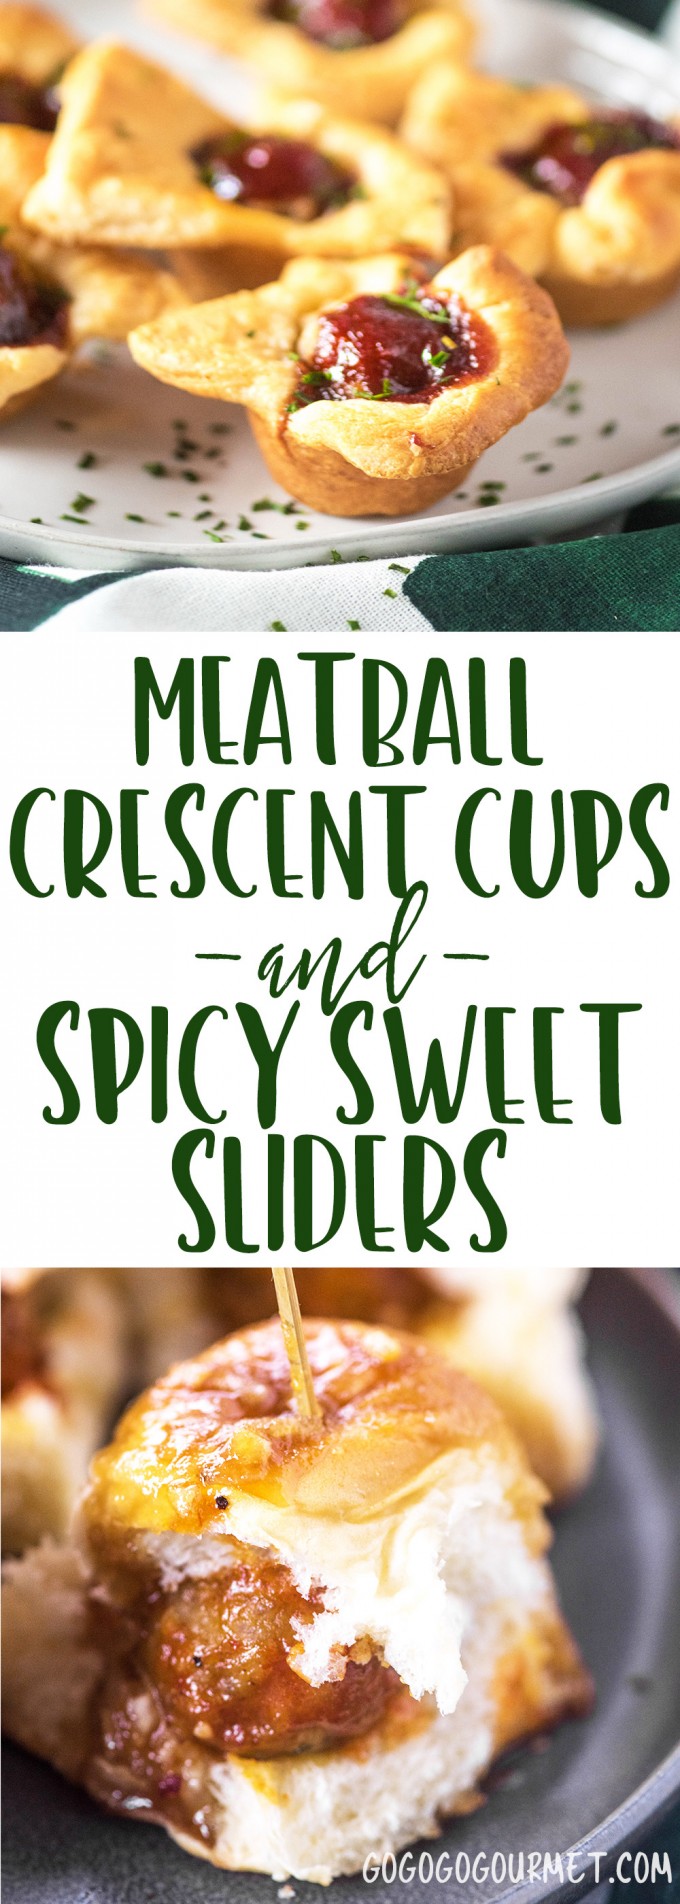 These easy meatball appetizers are perfect for Thanksgiving and any Christmas party- crescent roll meatball cups and spicy sweet meatball sliders on Hawaiian rolls! via @gogogogourmet